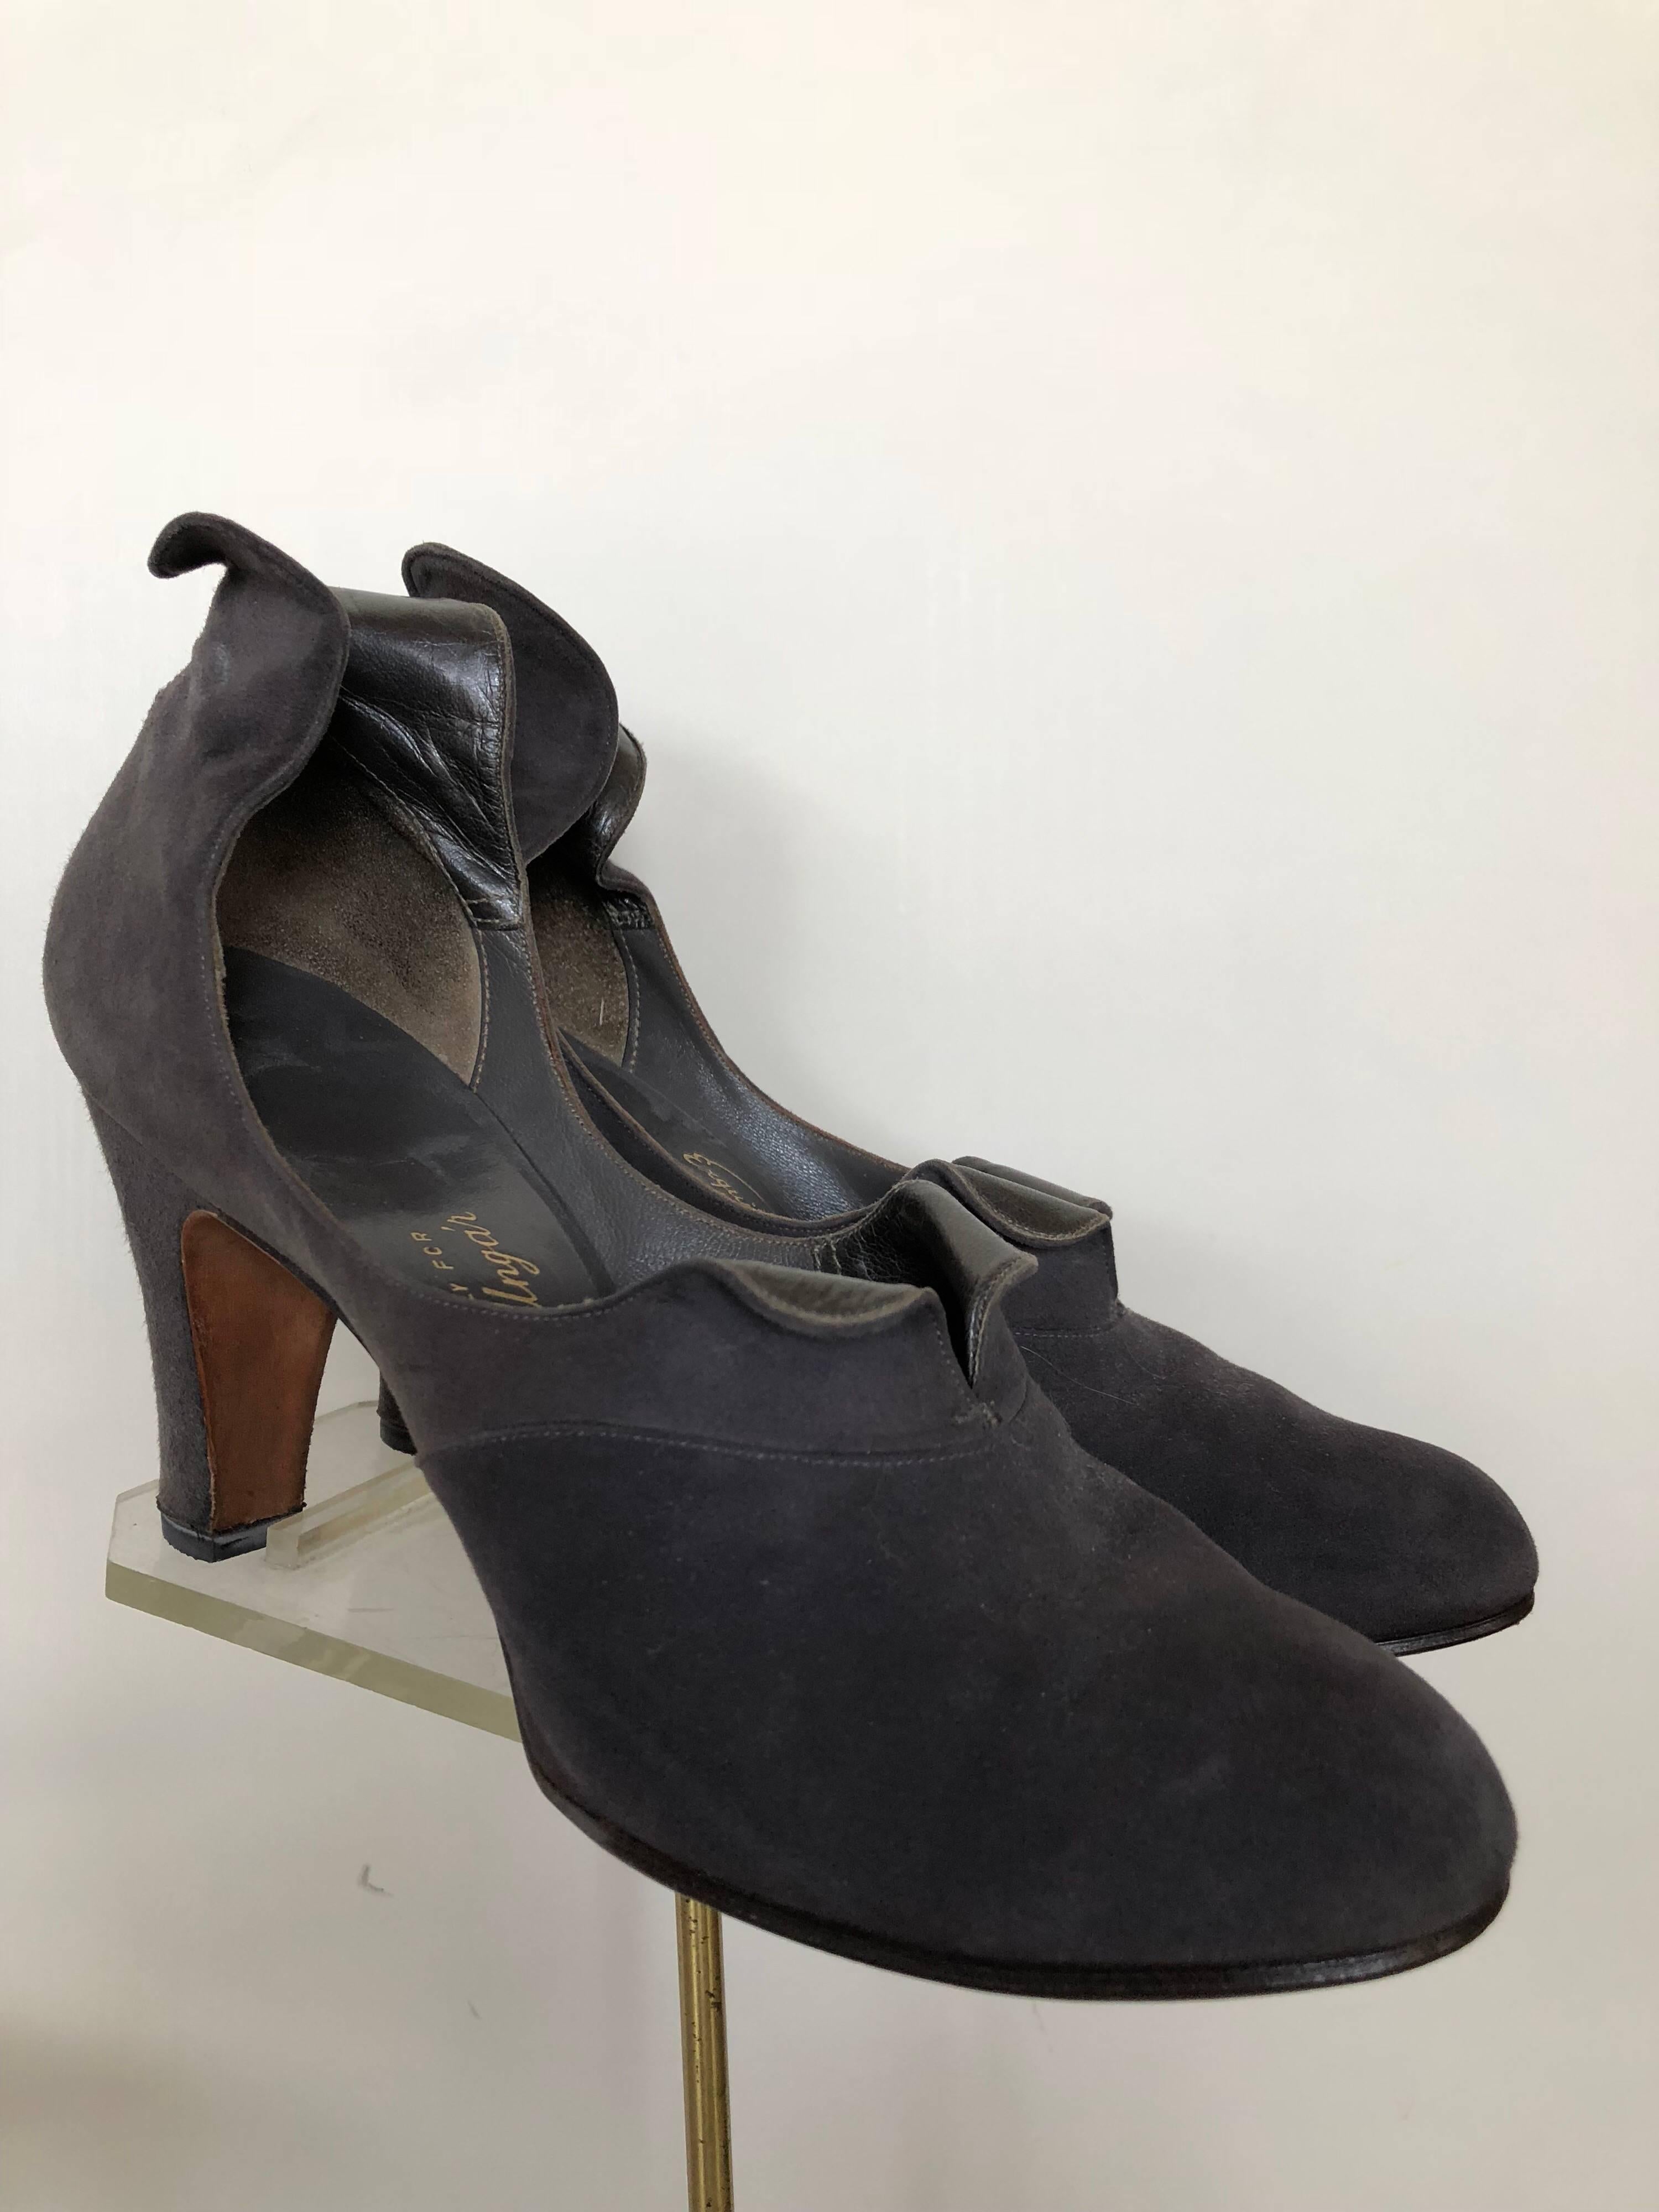 Black Nicholas Ungar Suede D'Orsay Shoes With Sculptural Rolled Tab Design, 1940s For Sale